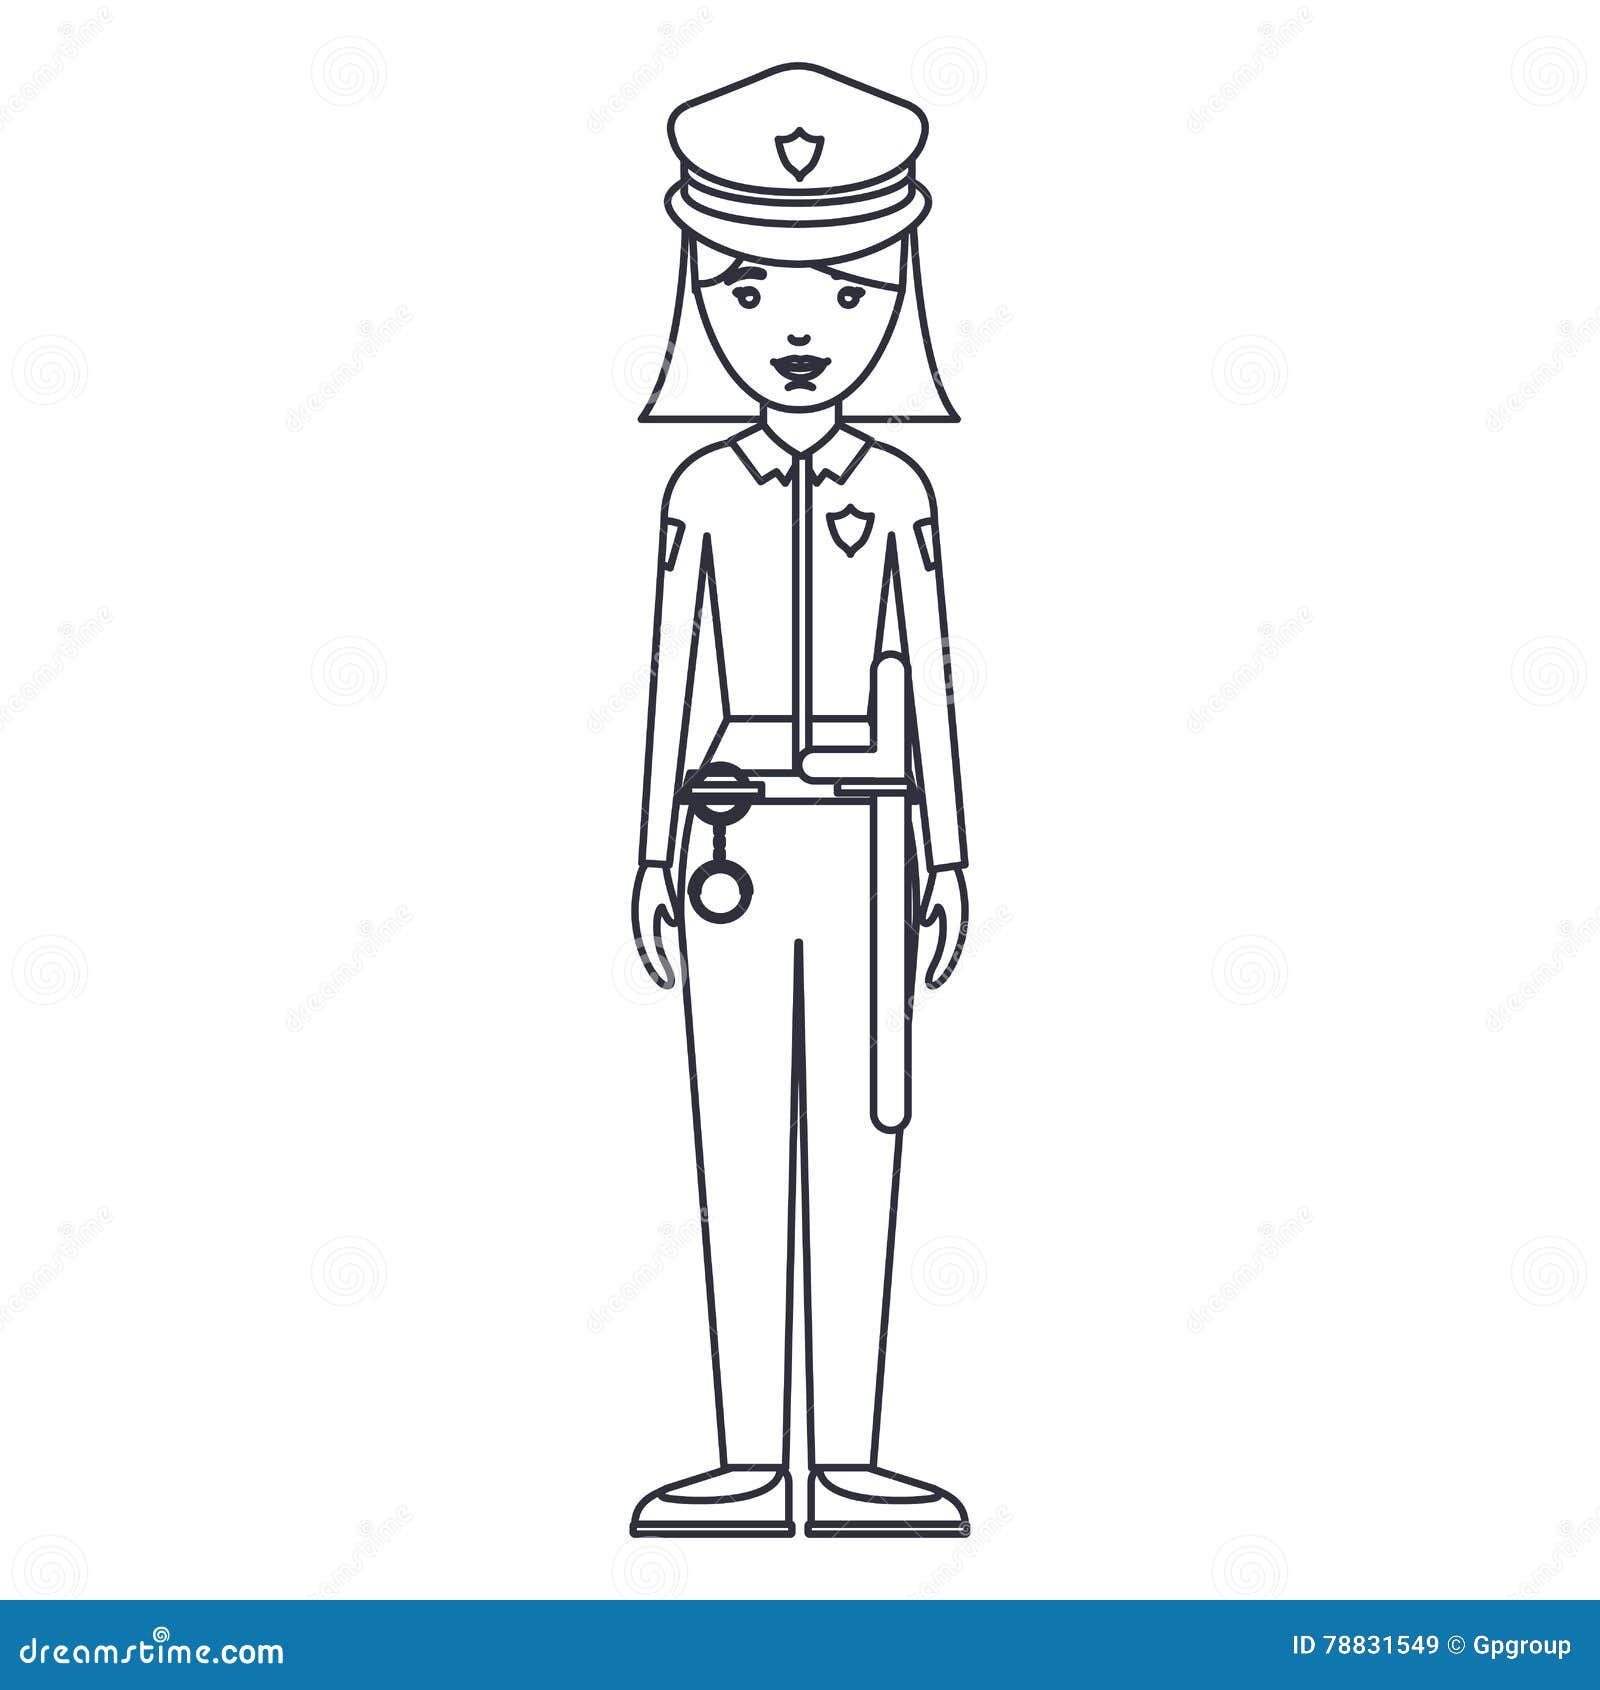 Featured image of post Cartoon Police Woman Drawing - Police uniform, police officer, cartoon, woman, traffic police, madhya pradesh police, finger, headgear png.